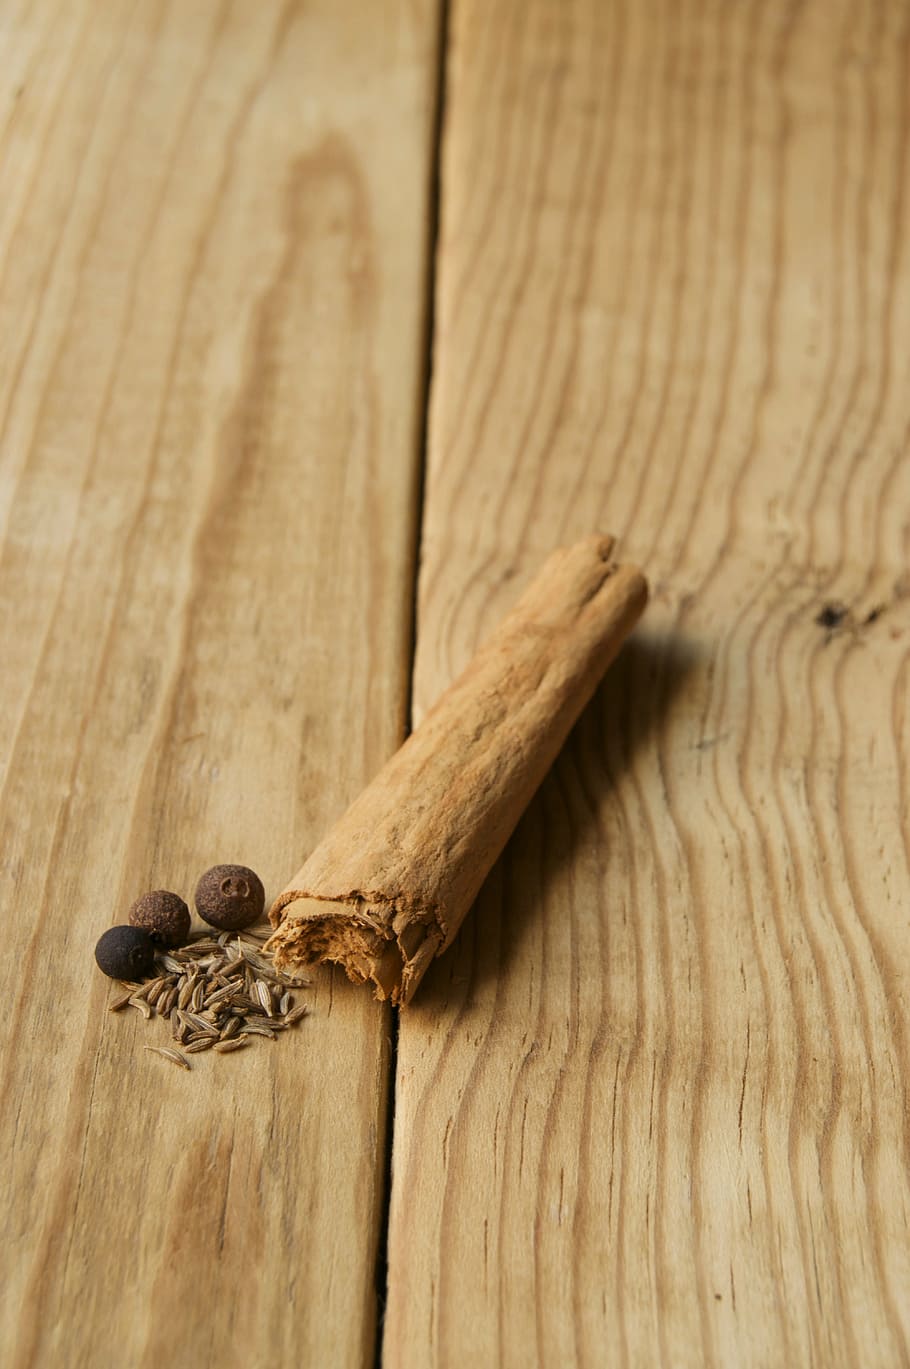 brown, roll, grain, table, wood, food, crops, wood - material, food and drink, spice